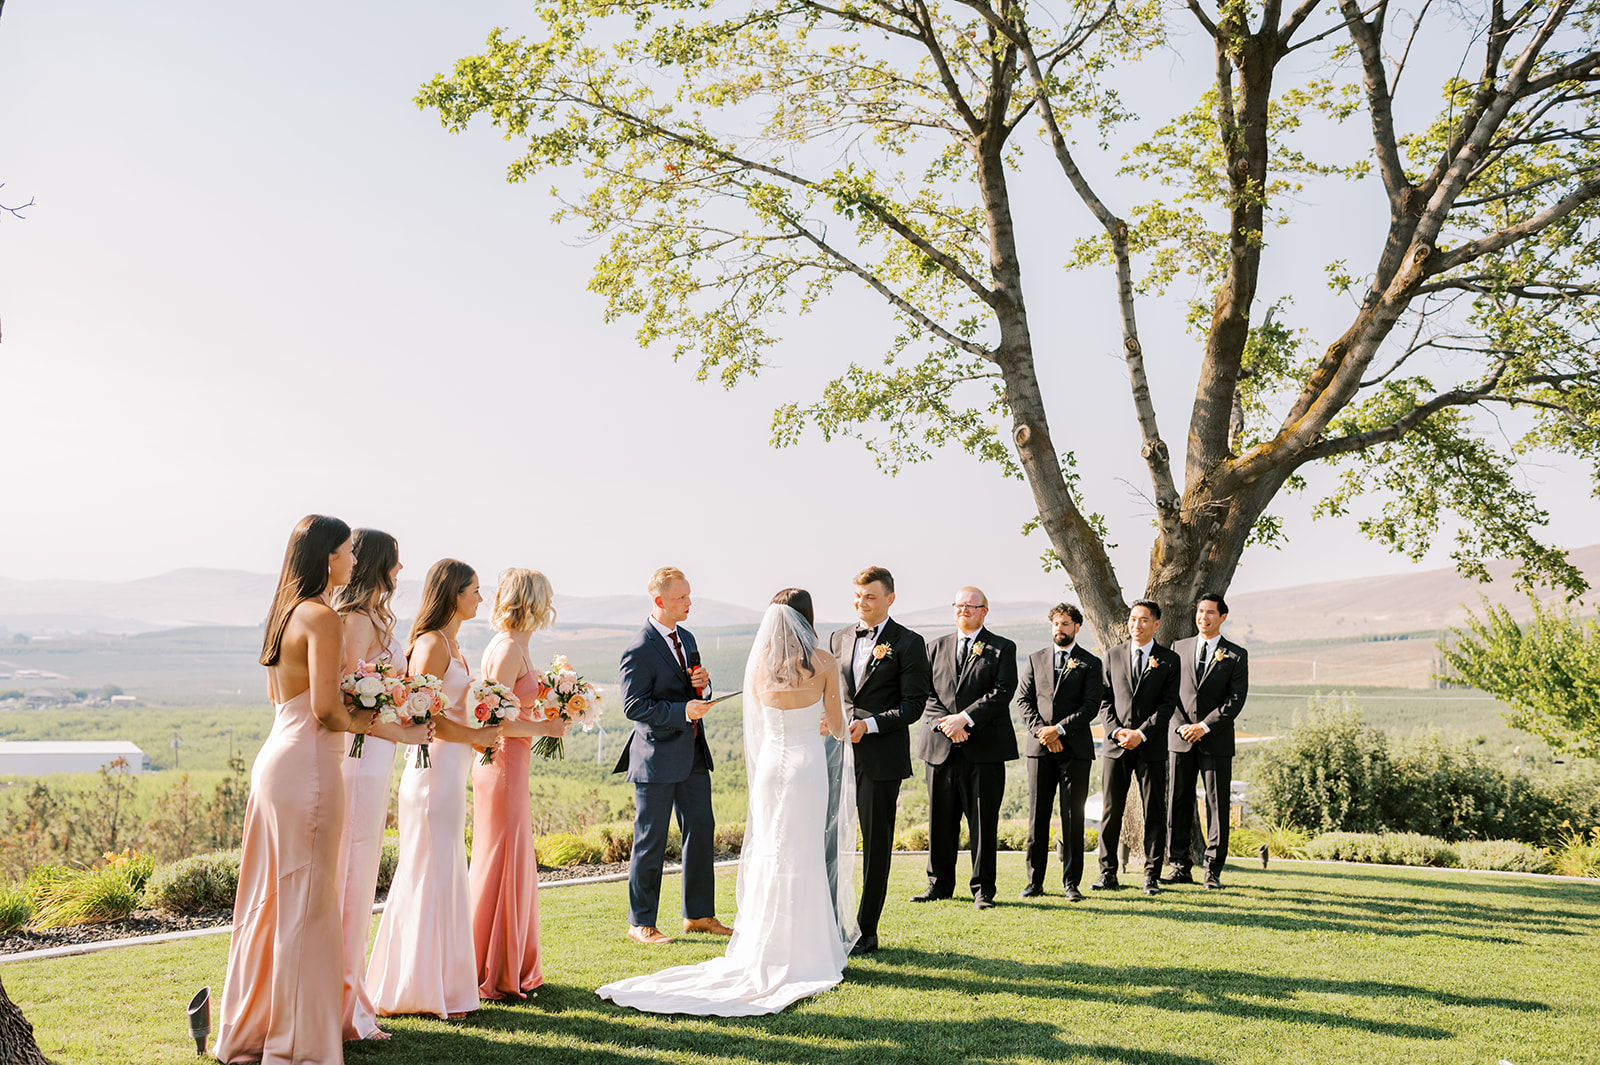 wedding at Freehand Cellars in Yakima's wine country